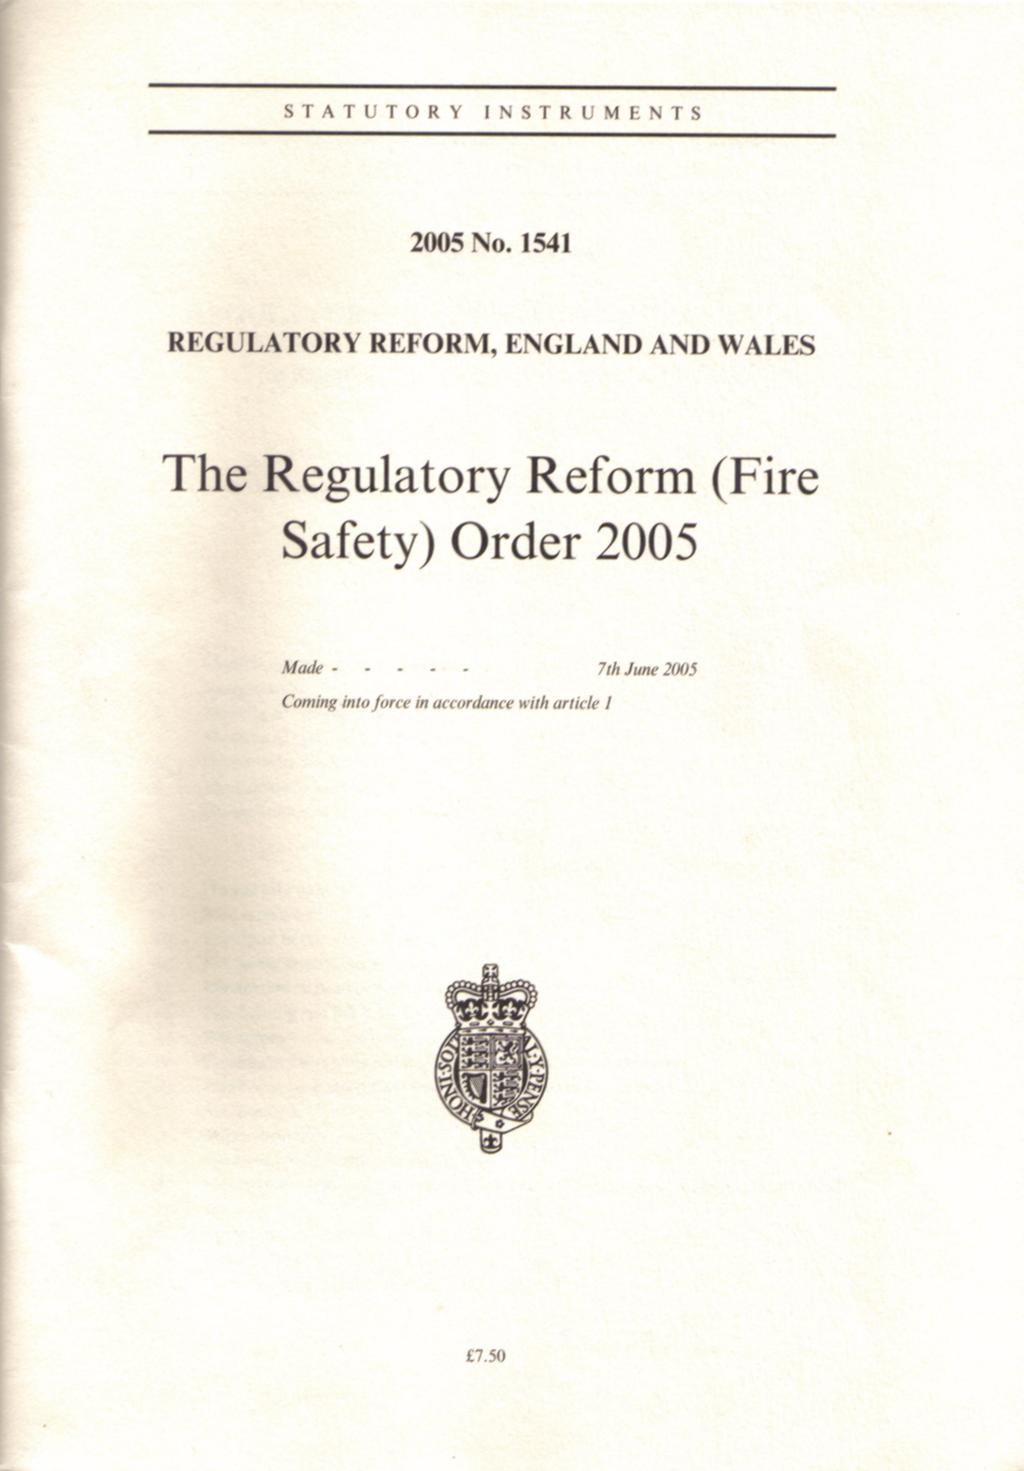 What are the new regulations?